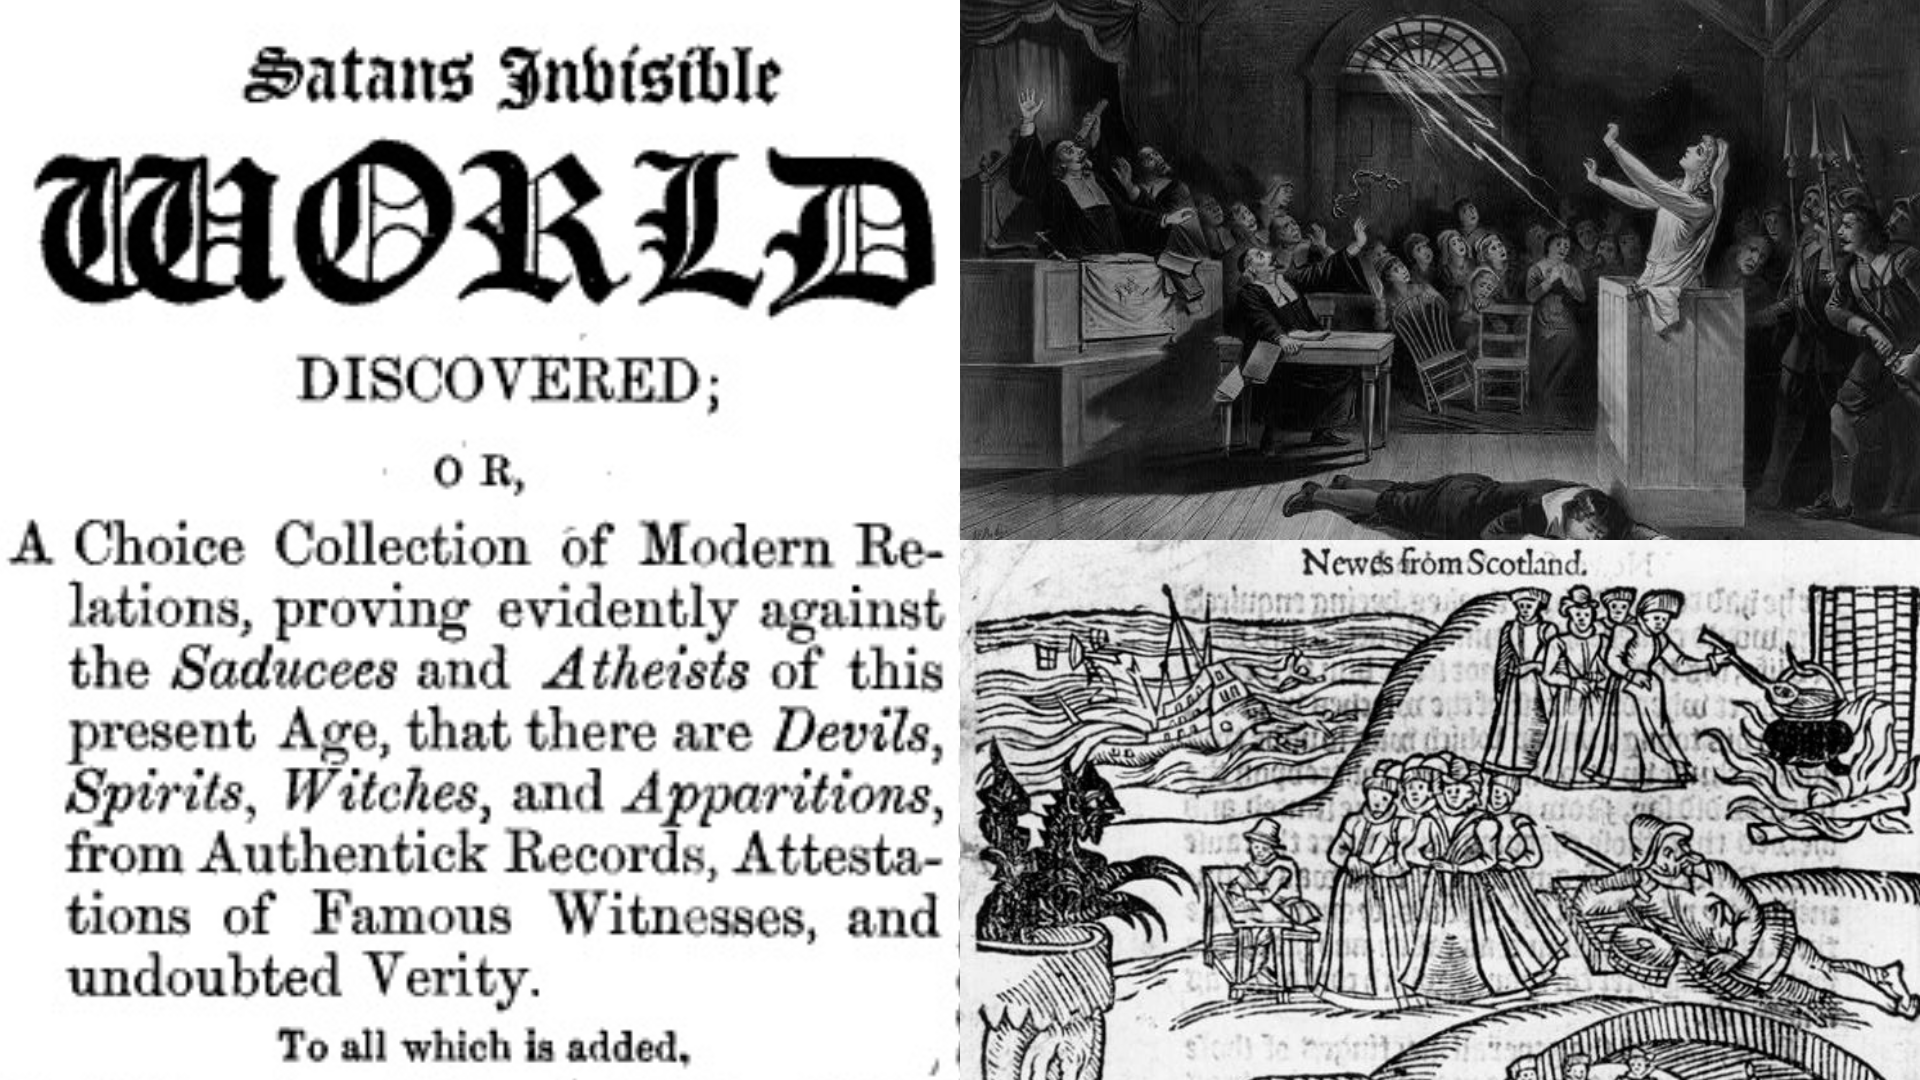 Three images: a news pamphlet on ‘Satan’s Invisible World’, The Witch, No. 1, lithograph by Joseph E. Baker from 1892, and a wood cutting from Newes from Scotland on the North Berwick Witch Trials. 